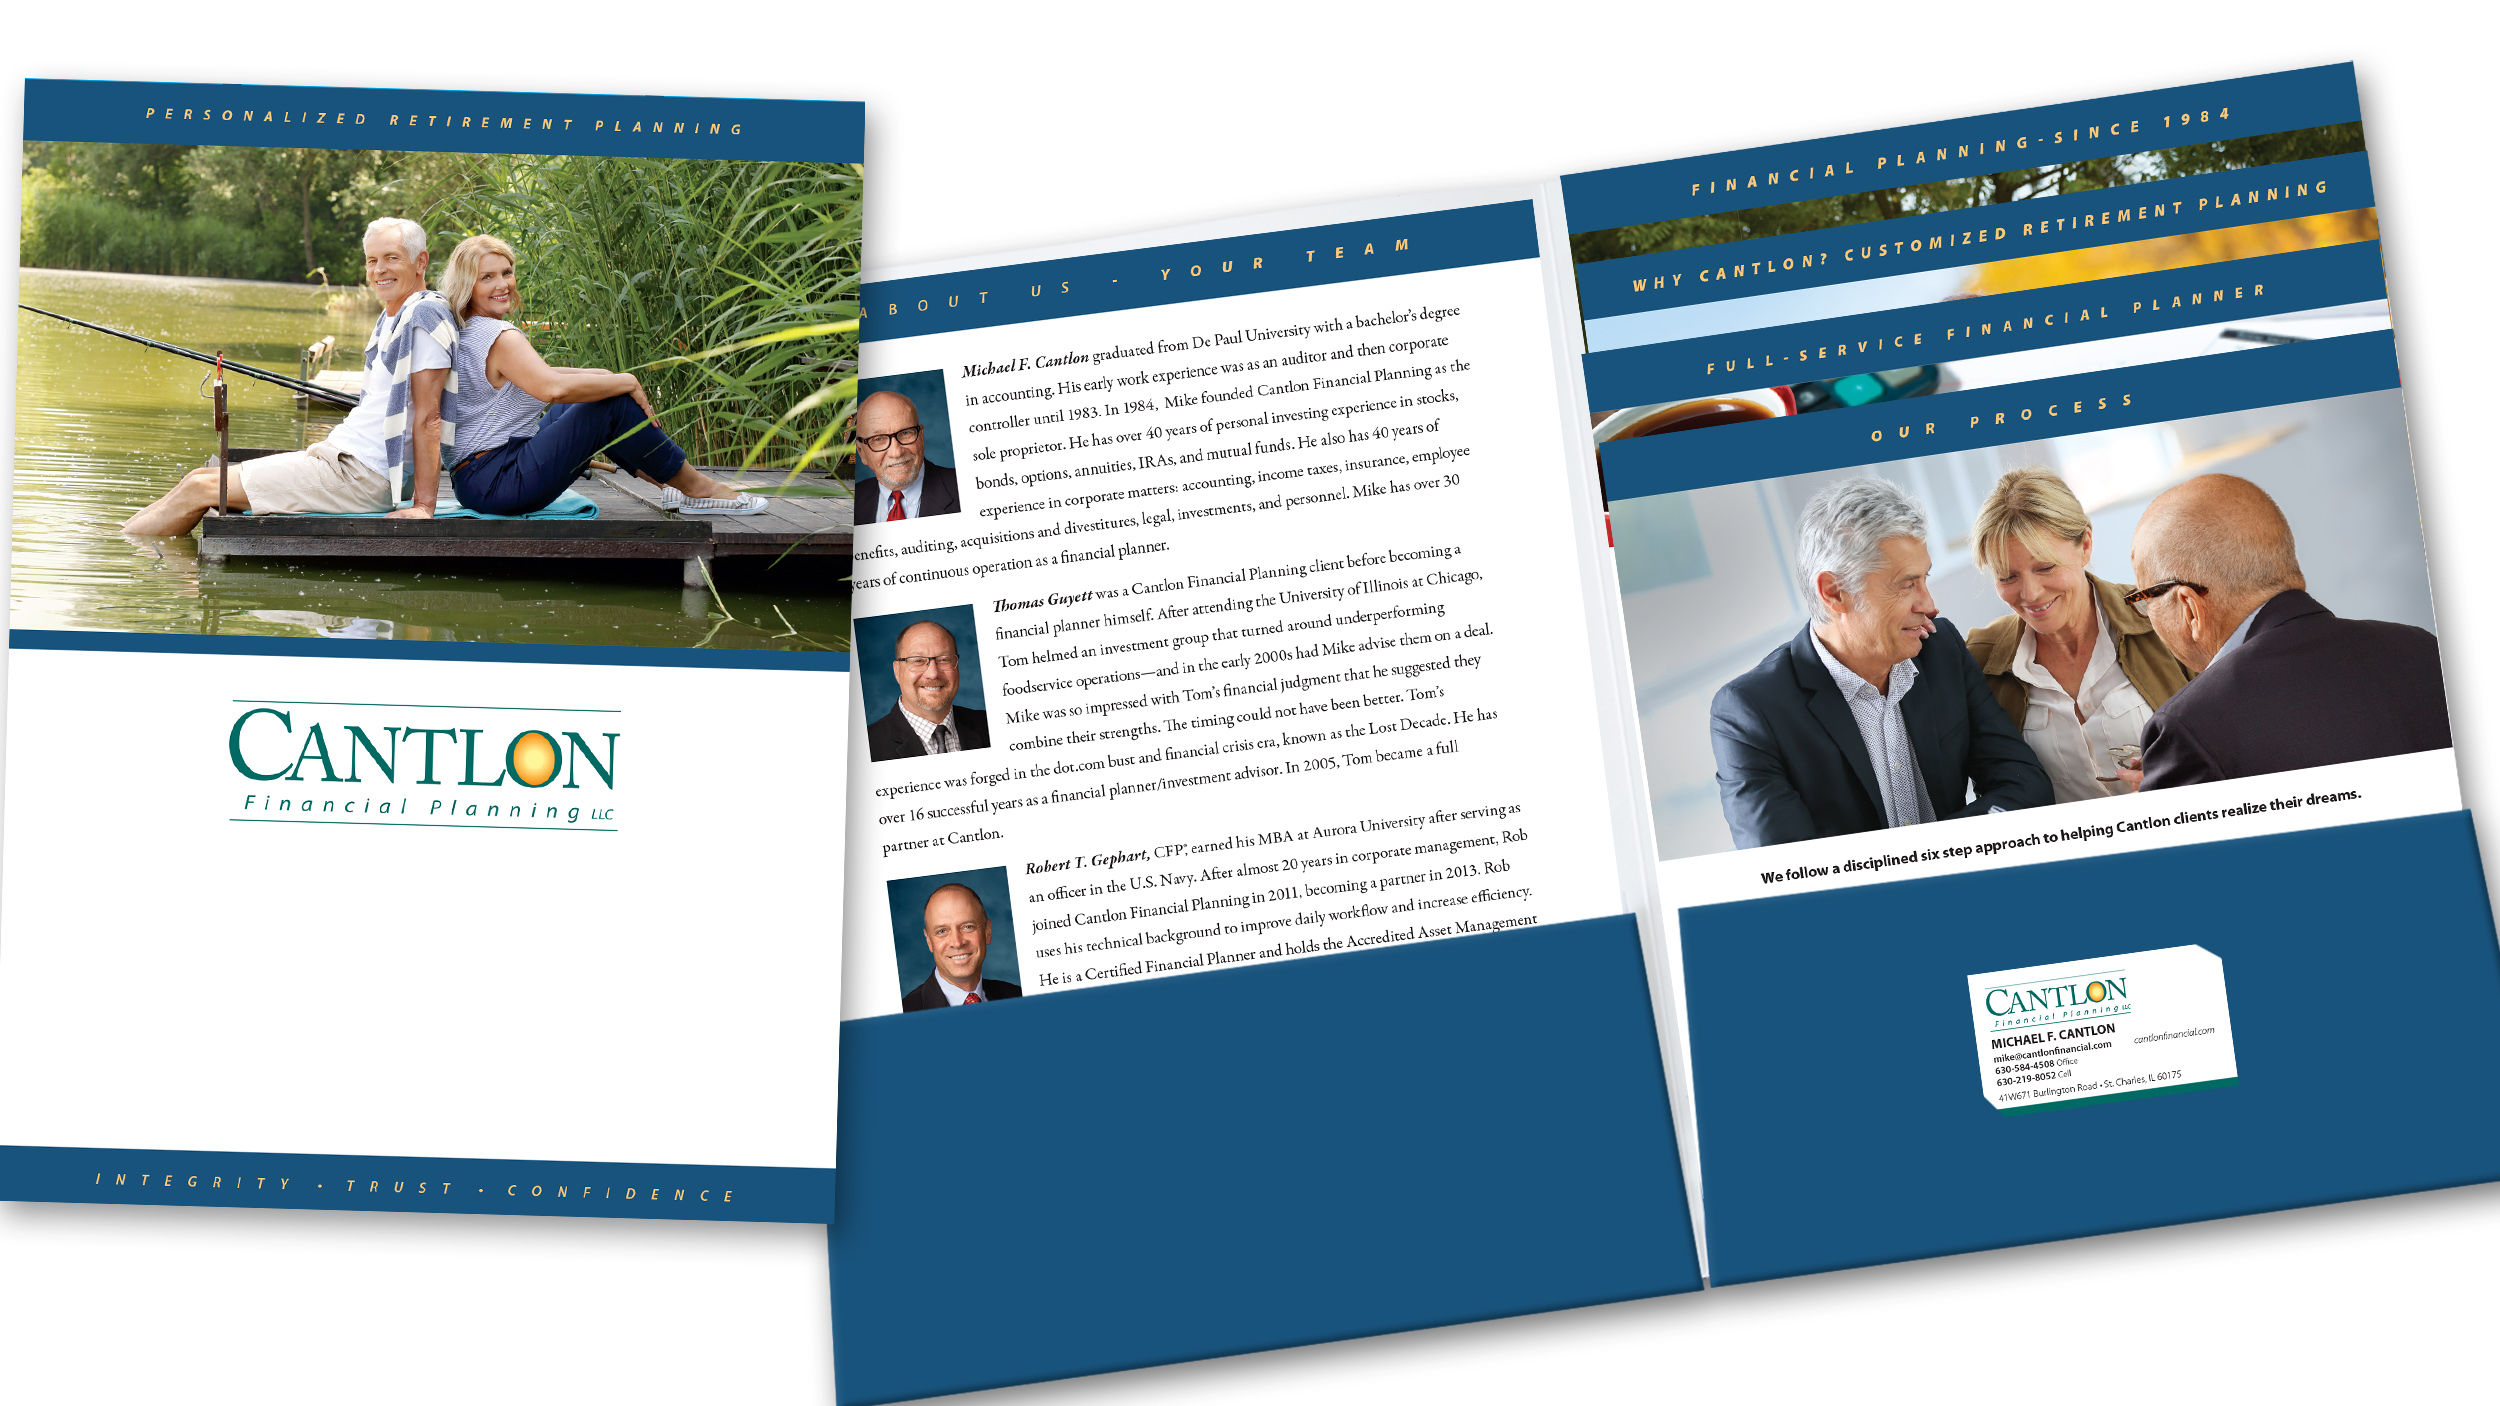 Cantlon-Financial-Planning-brochure-Collateral-Material.jpg